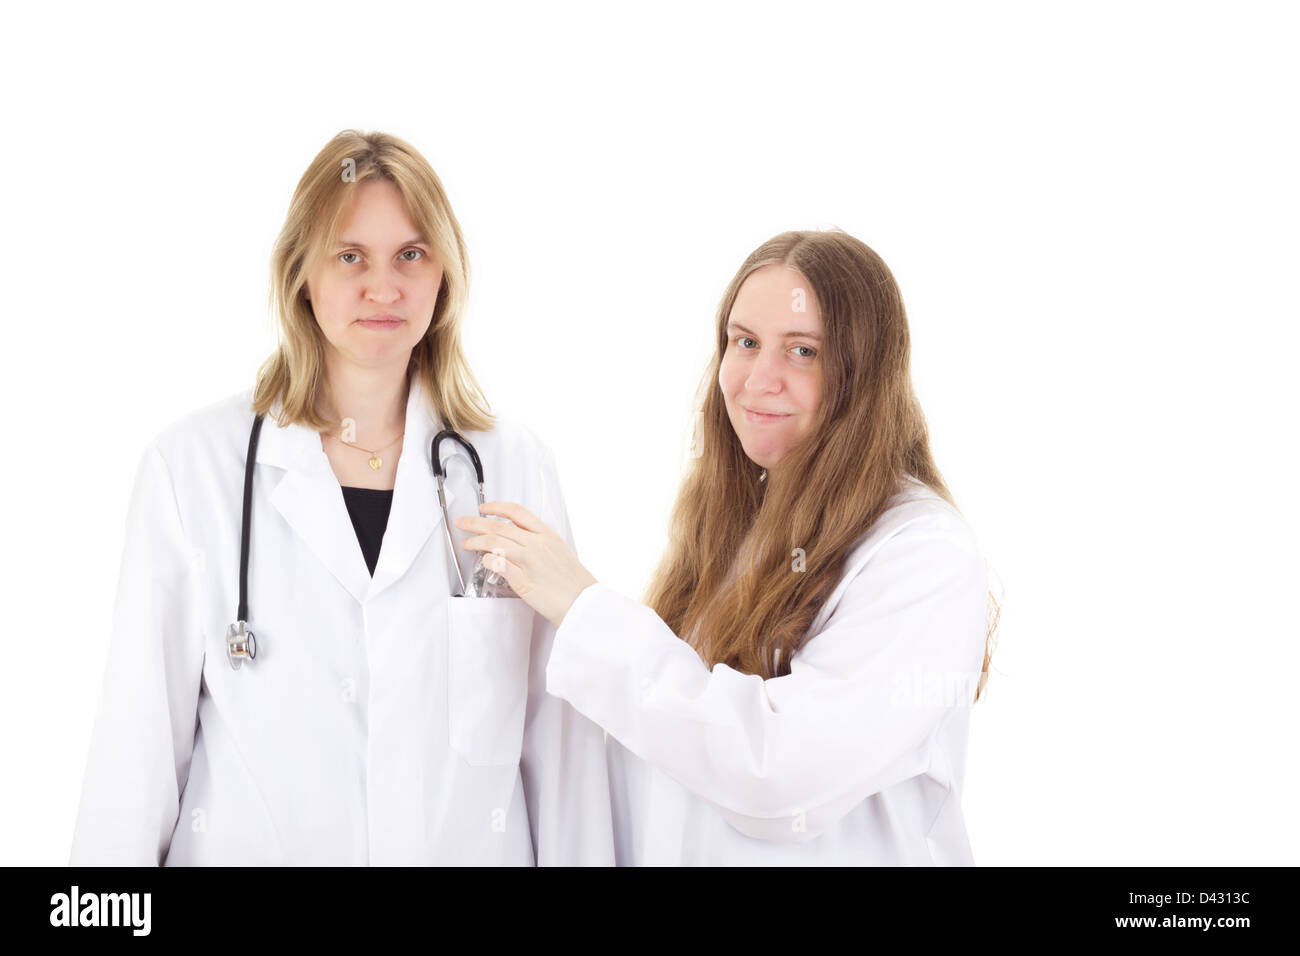 Two female medical doctors Stock Photo